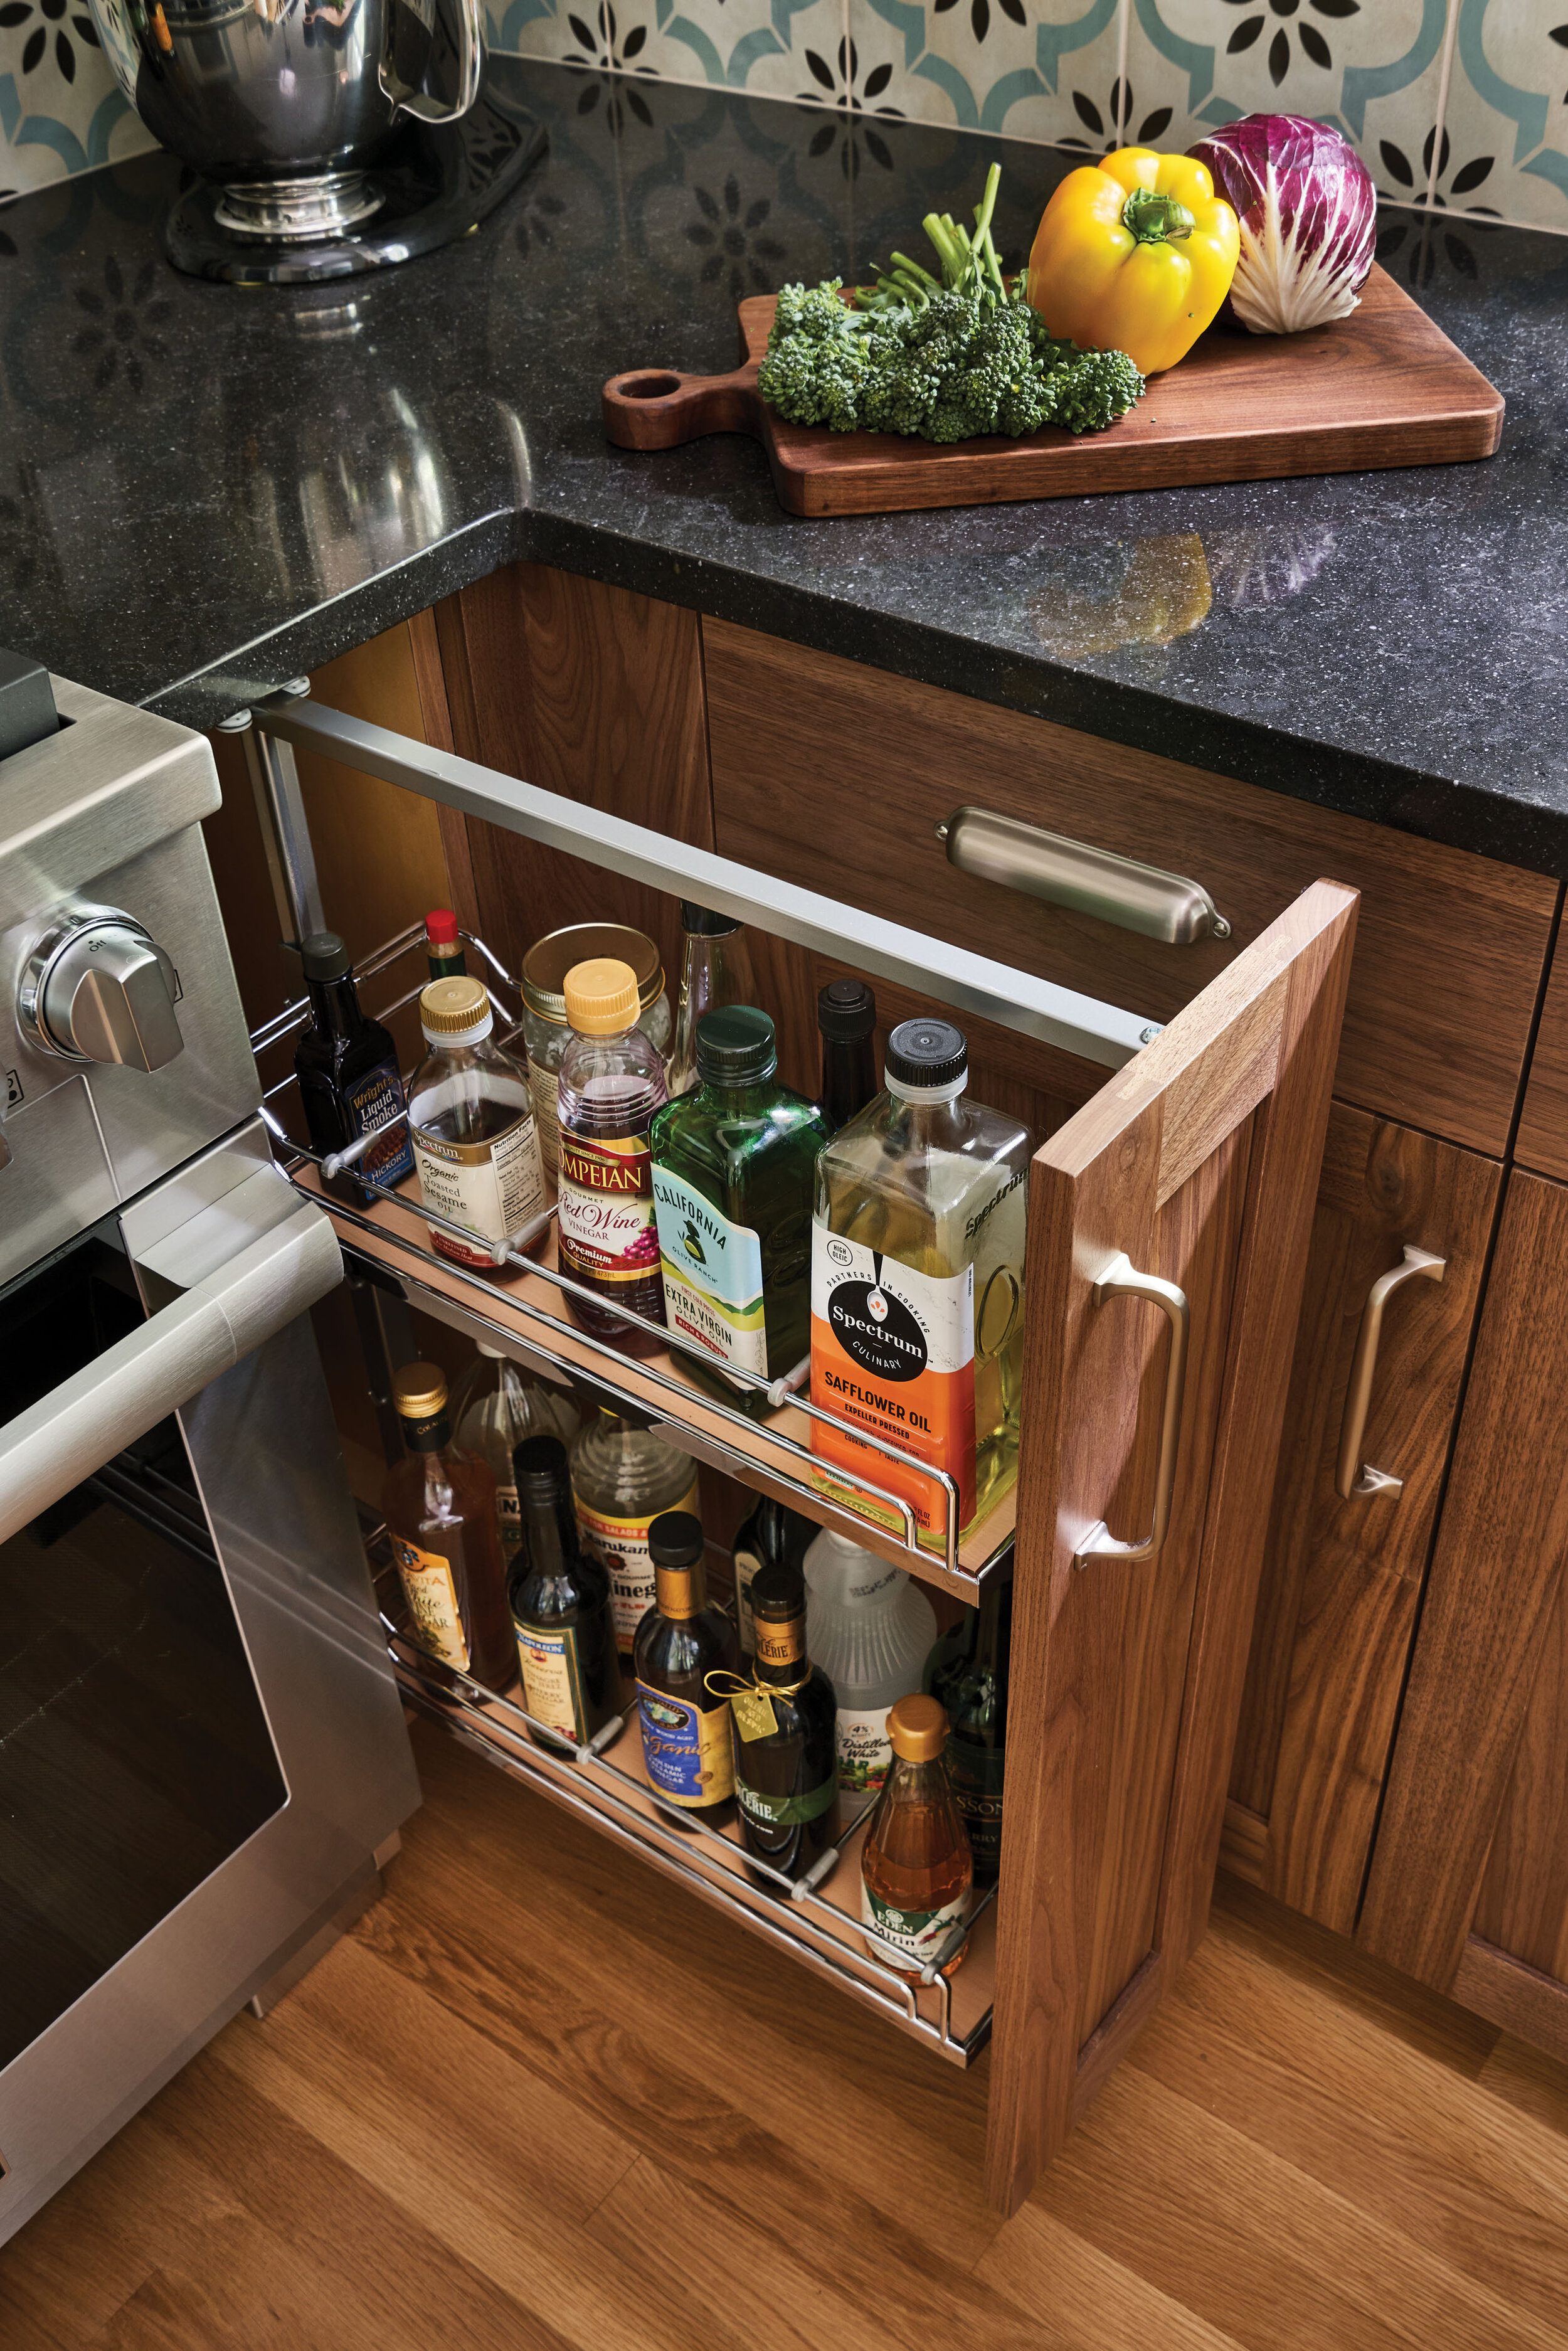 Innovative storage ideas add space to the tight kitchen corner space.